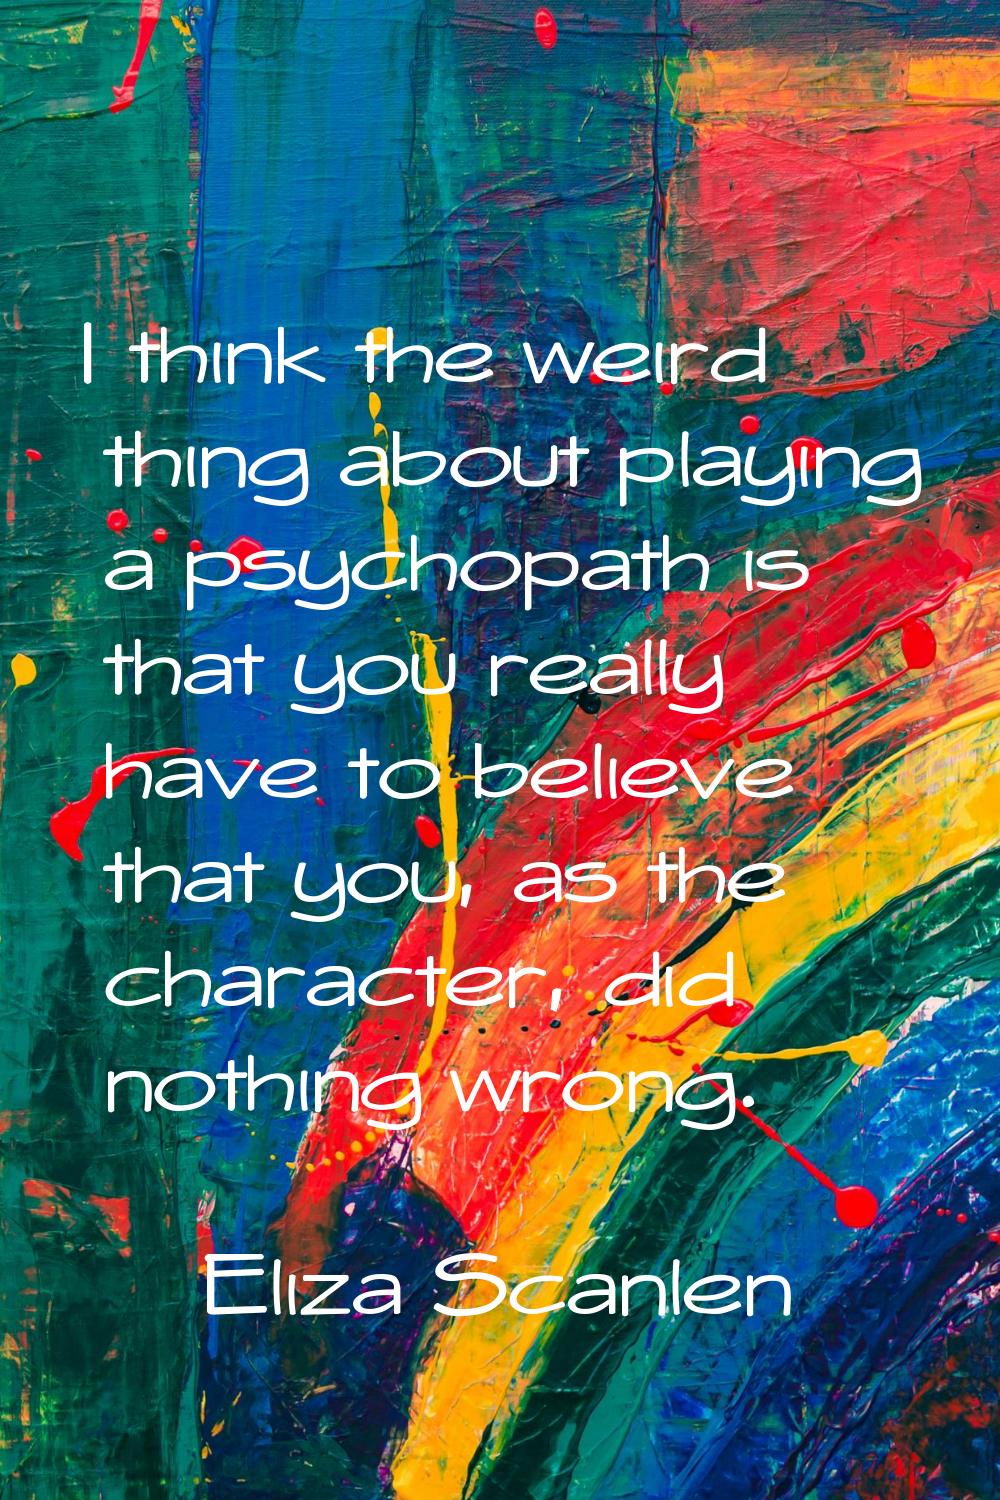 I think the weird thing about playing a psychopath is that you really have to believe that you, as 